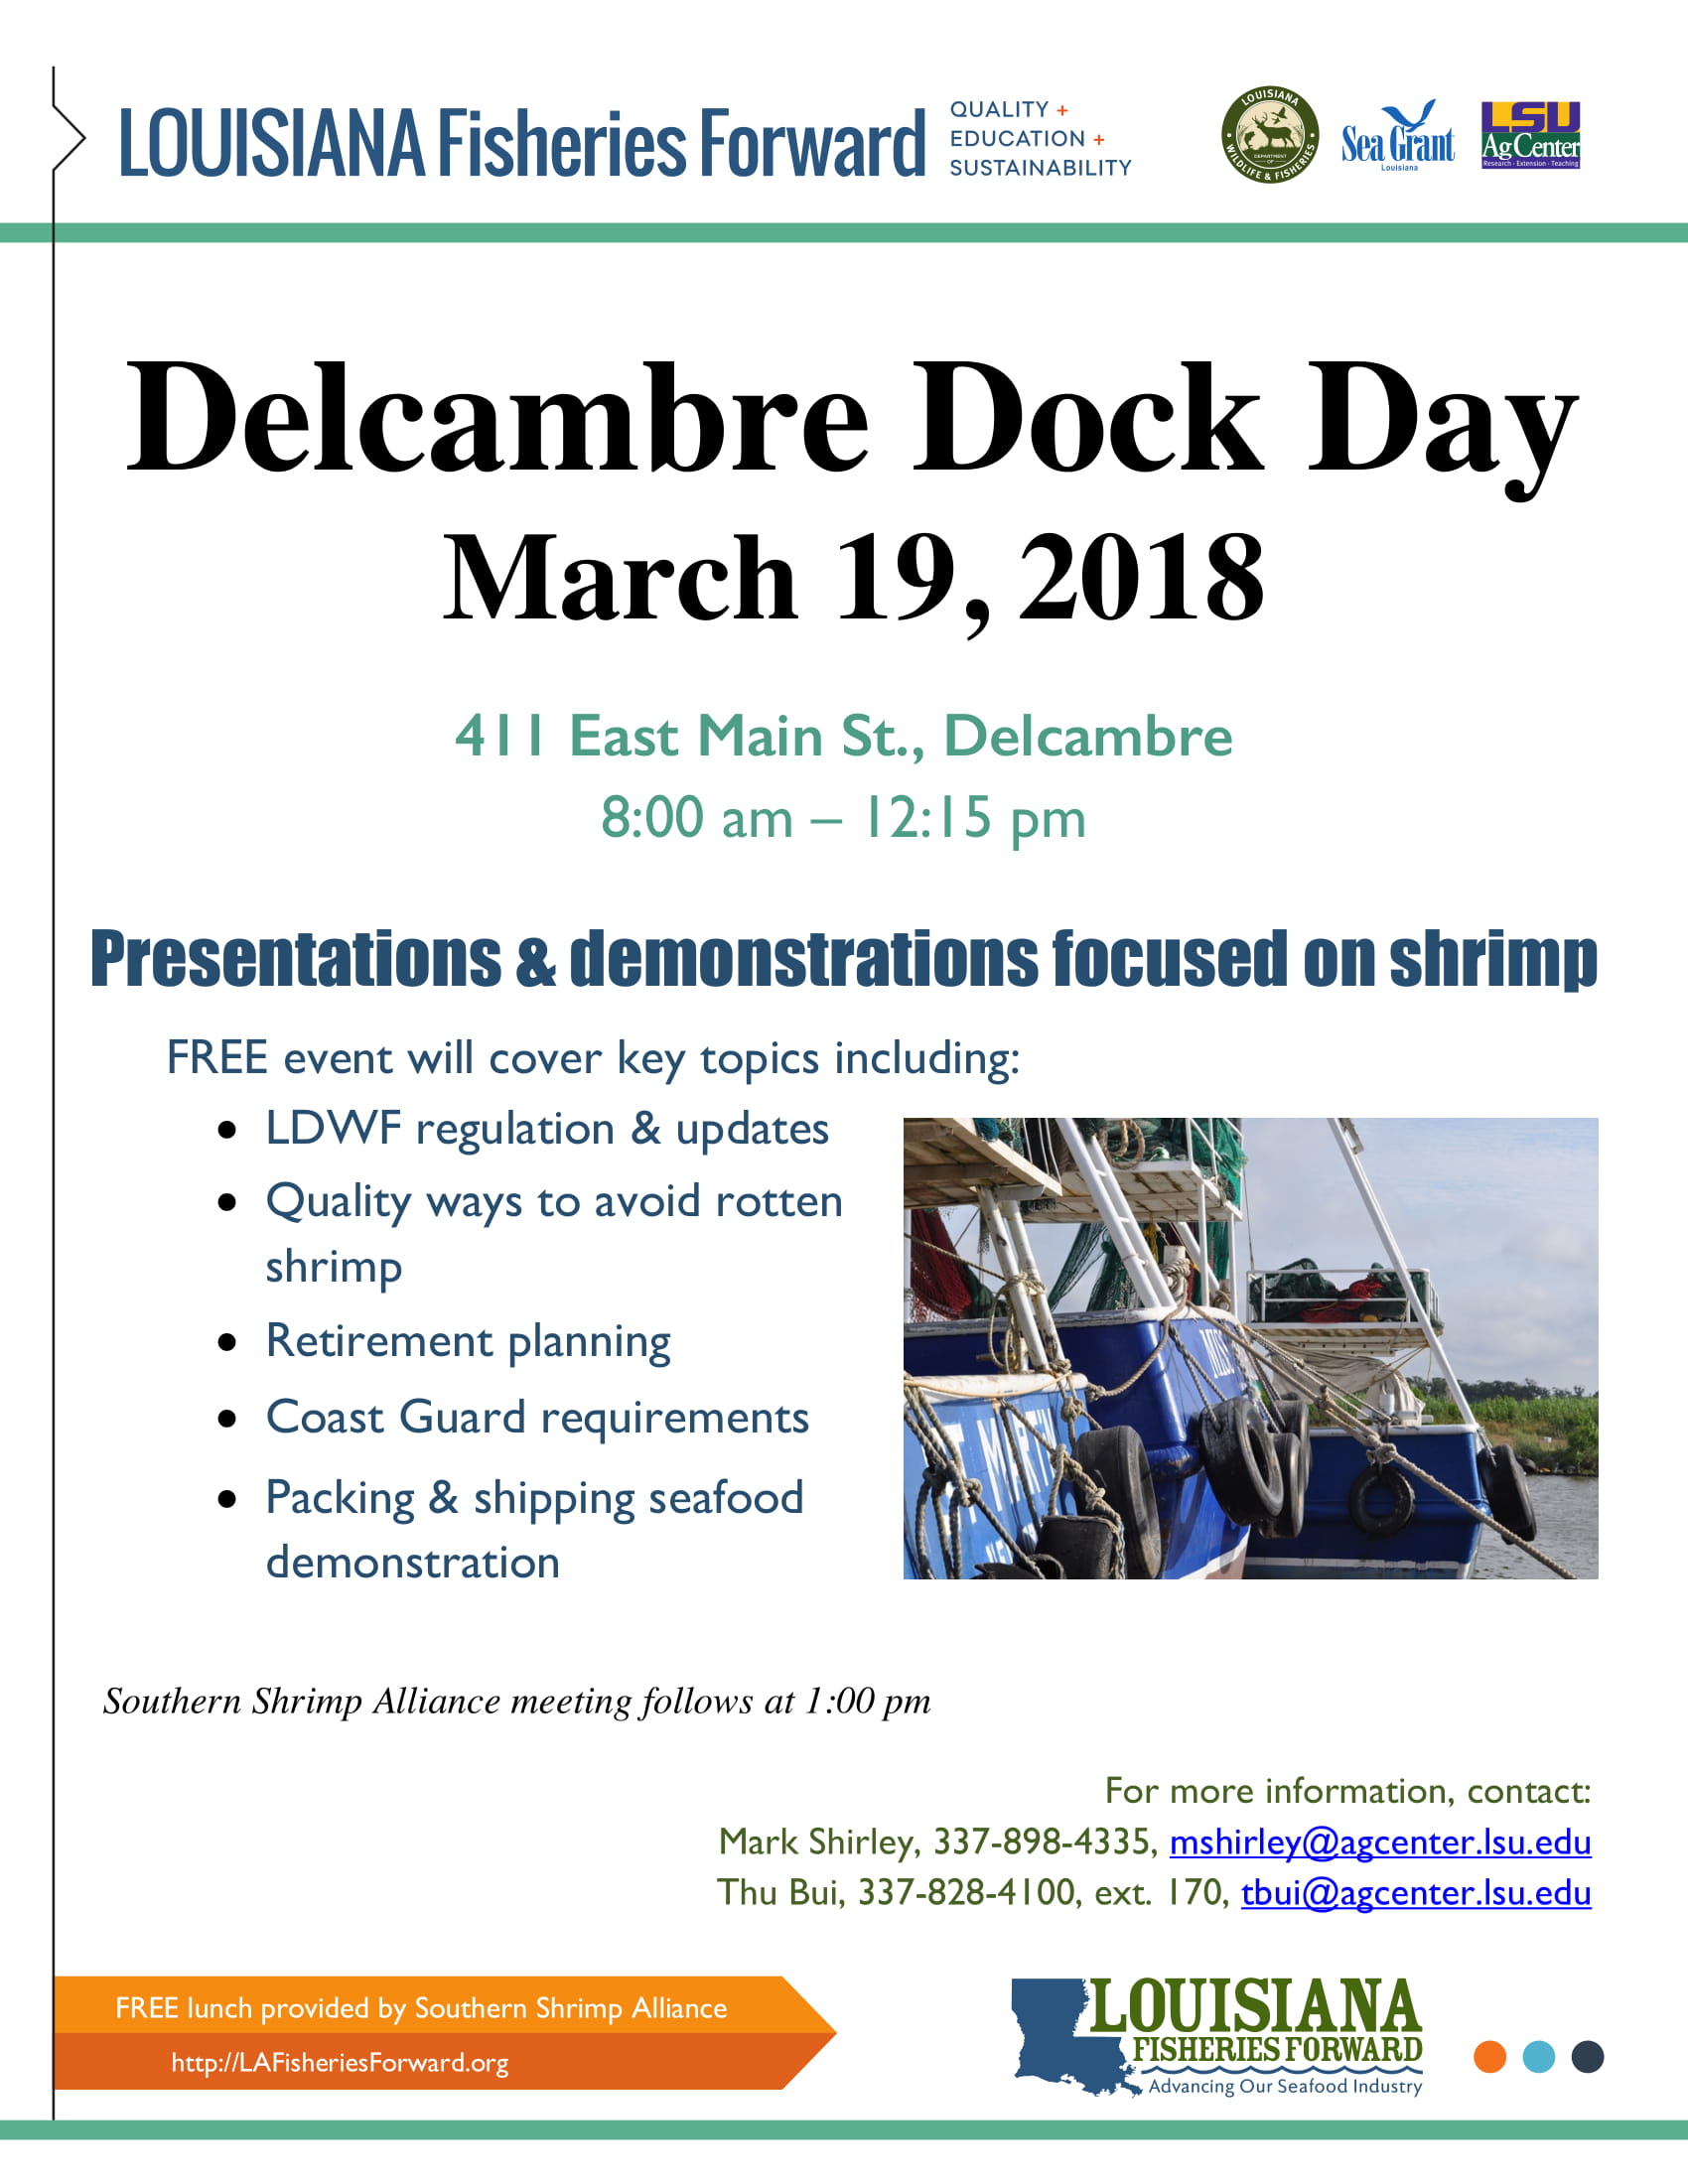 Delcambre Dock Day March 19, 2018 411 East Main St., Delcambre 8:00 am – 12:15 pm Presentations & demonstrations focused on shrimp FREE event will cover key topics including: • LDWF regulation & updates • Quality ways to avoid rotten shrimp • Retirement planning • Coast Guard requirements • Packing & shipping seafood demonstration Southern Shrimp Alliance meeting follows at 1:00 pm For more information, contact: Mark Shirley, 337-898-4335, mshirley@agcenter.lsu.edu Thu Bui, 337-828-4100, ext. 170, tbui@agcenter.lsu.edu FREE lunch provided by Southern Shrimp Alliance http://LAFisheriesForward.org